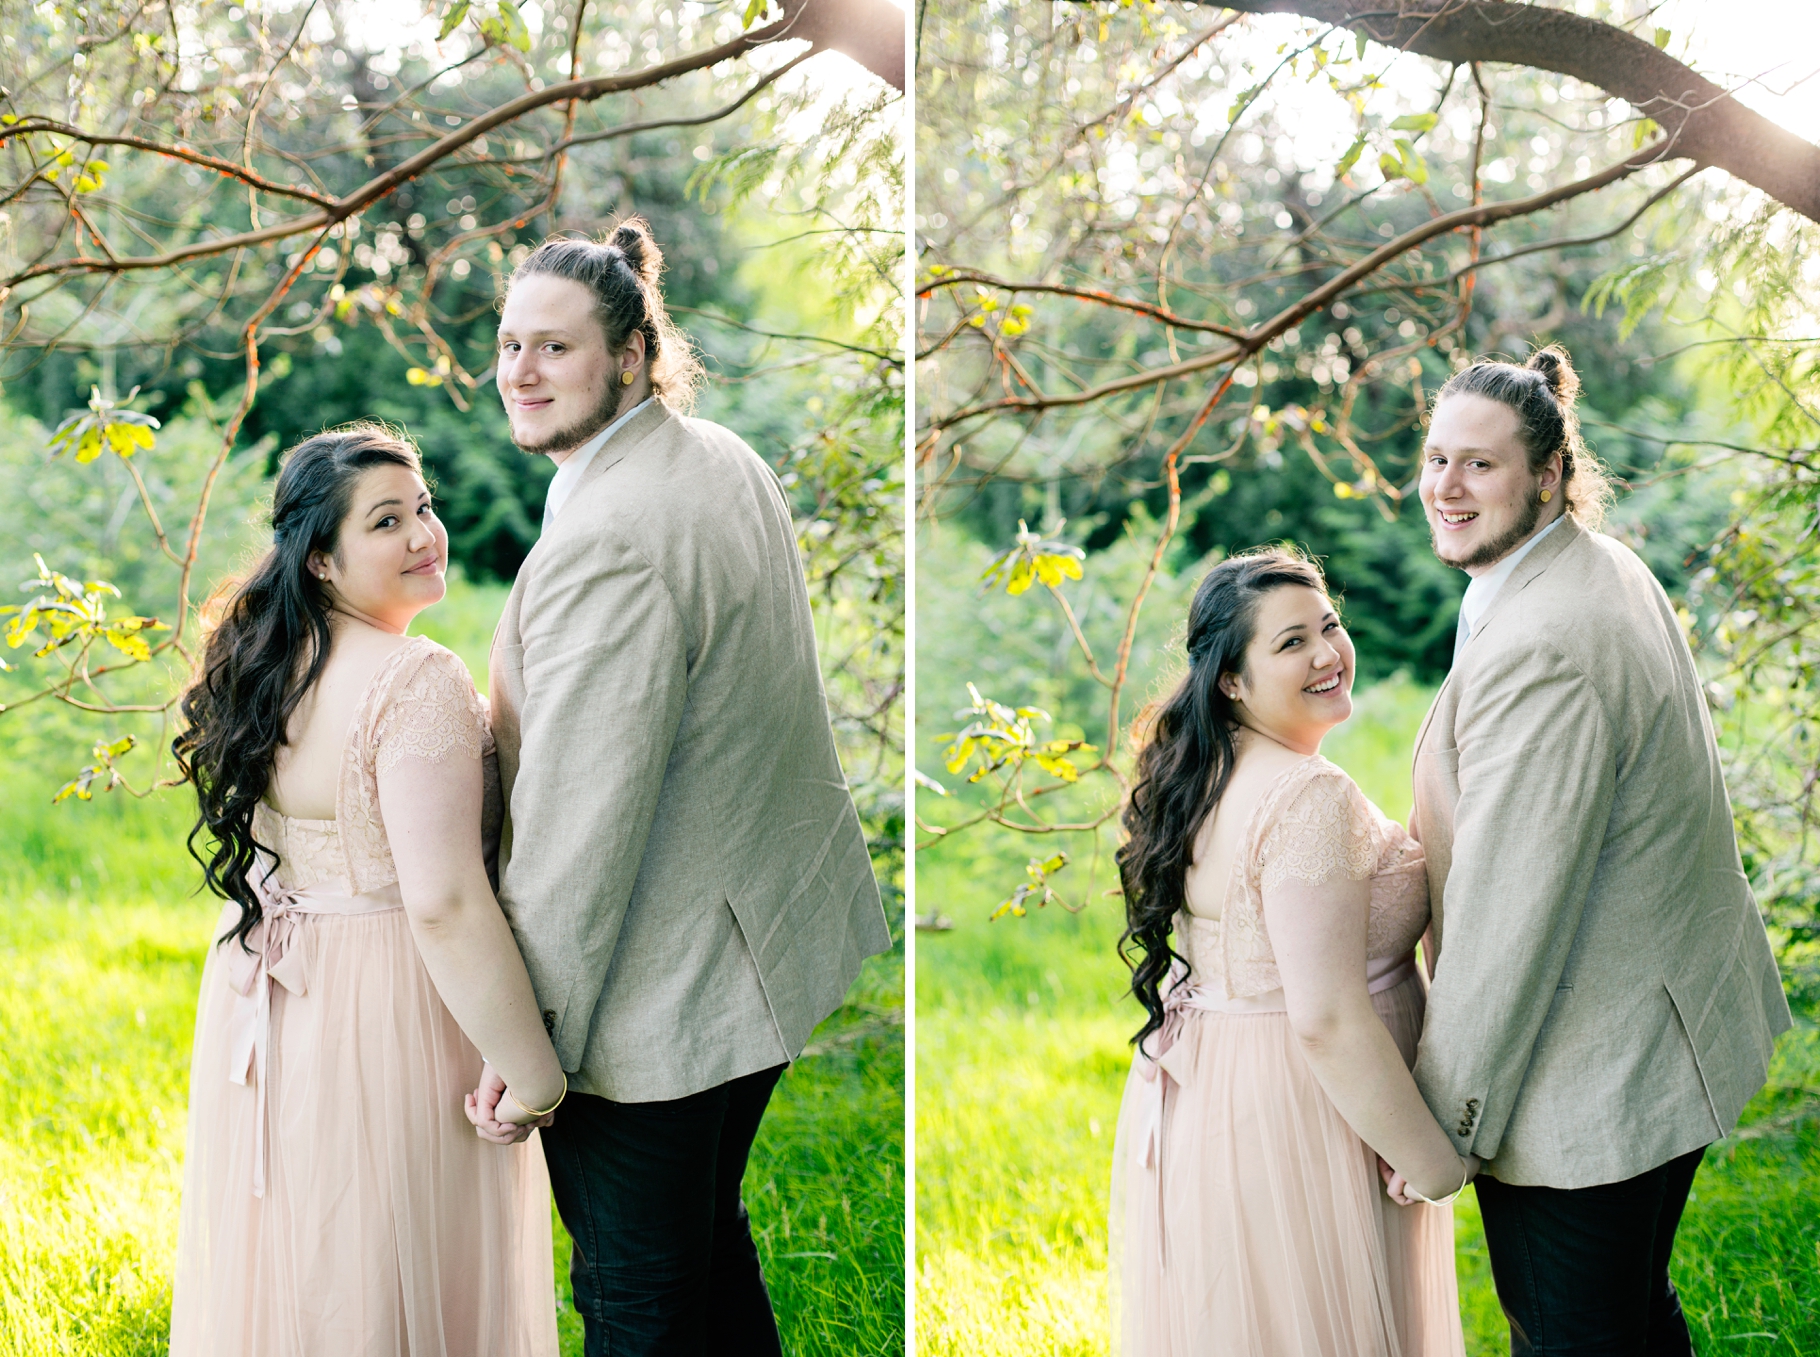 26-Bride-Groom-Portraits-Discovery-Park-Woodland-Elopement-Seattle-Photographer-Wedding-Photography-by-Betty-Elaine